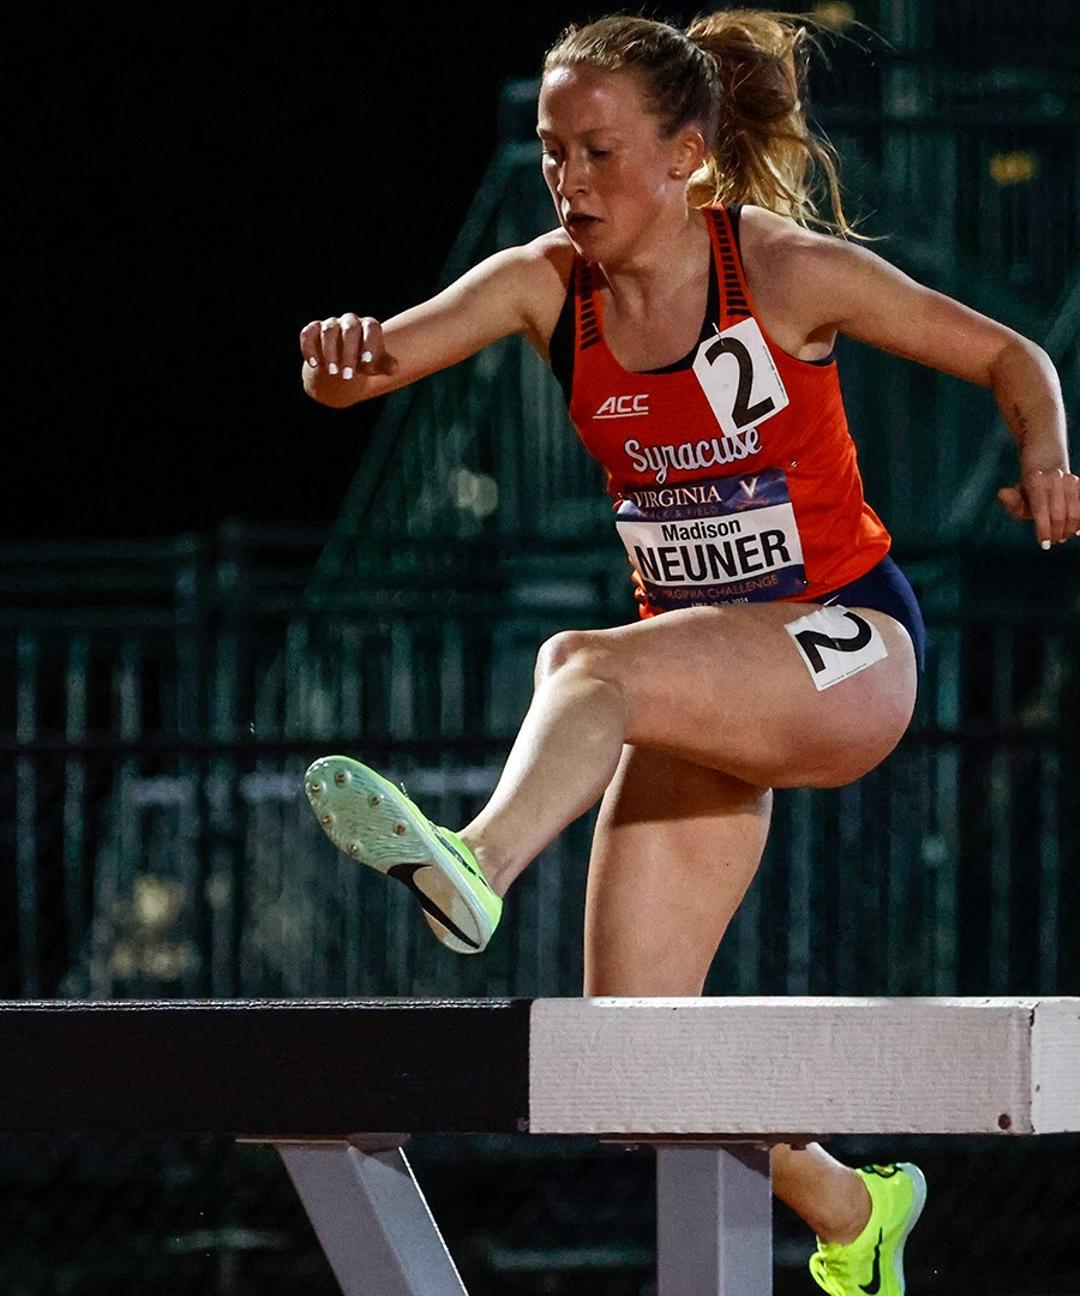 Image related to Neuner Runner-Up in ACC Steeplechase